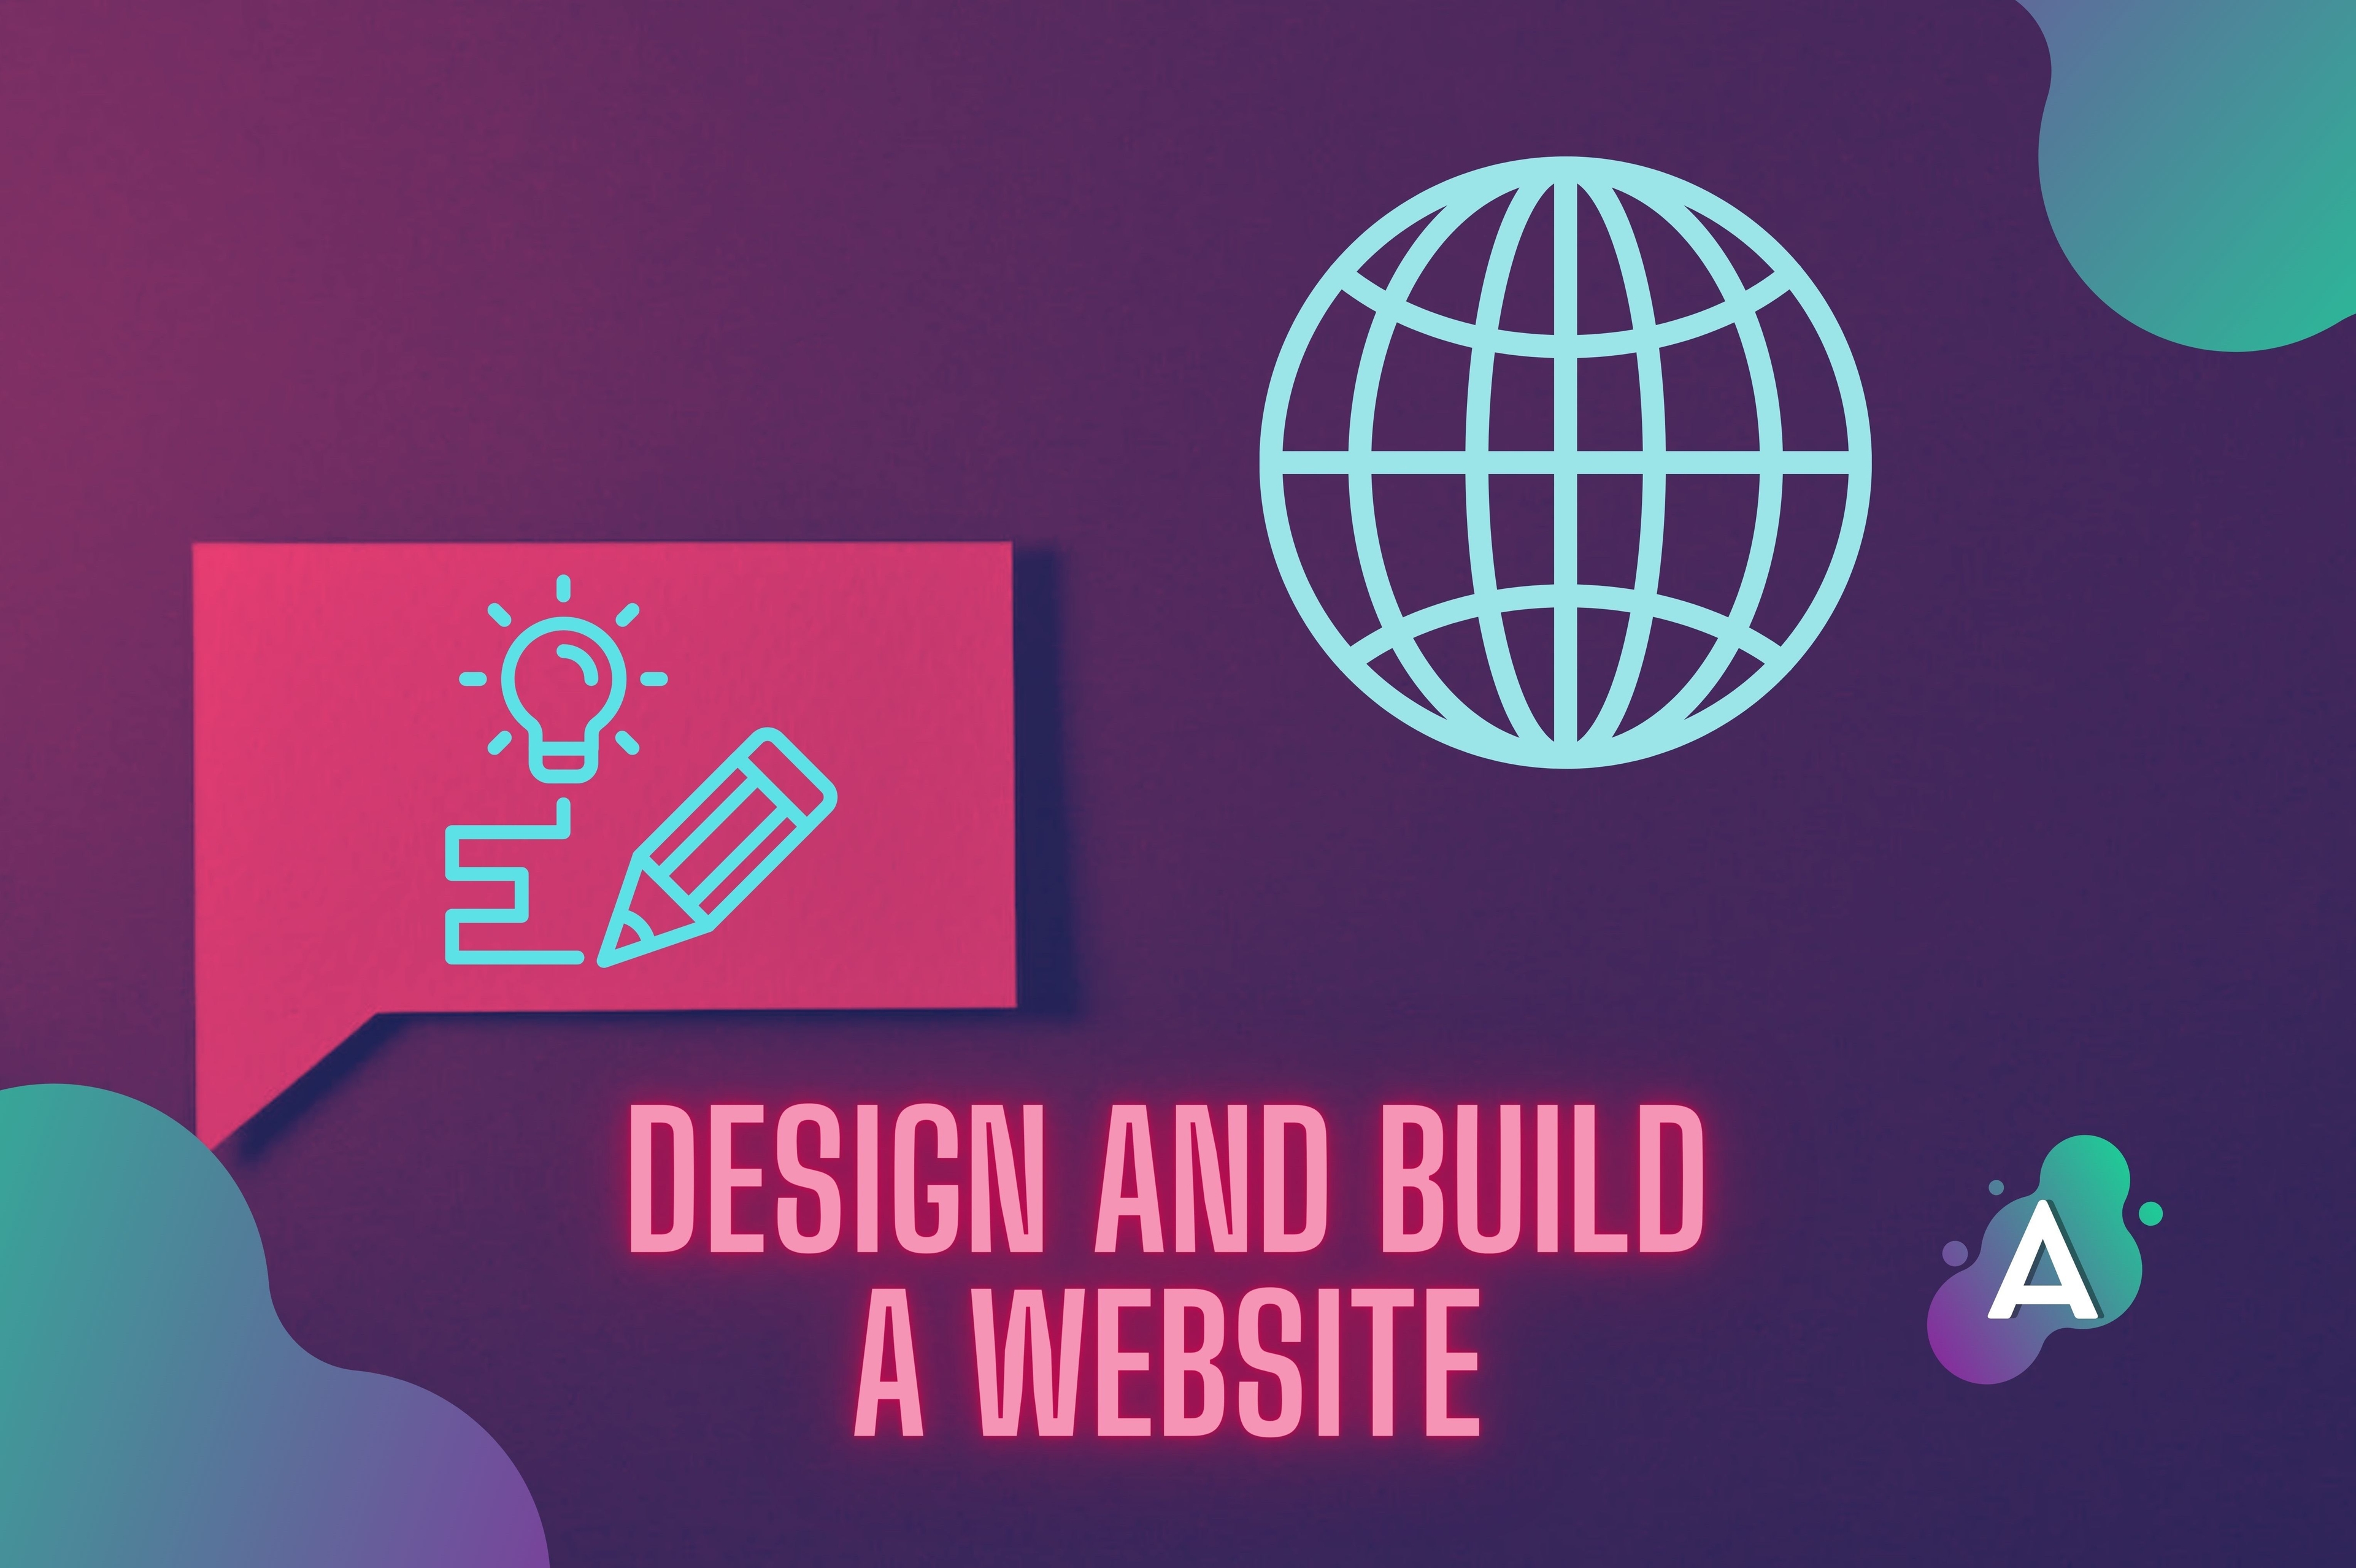 How To Design and Build a Website?